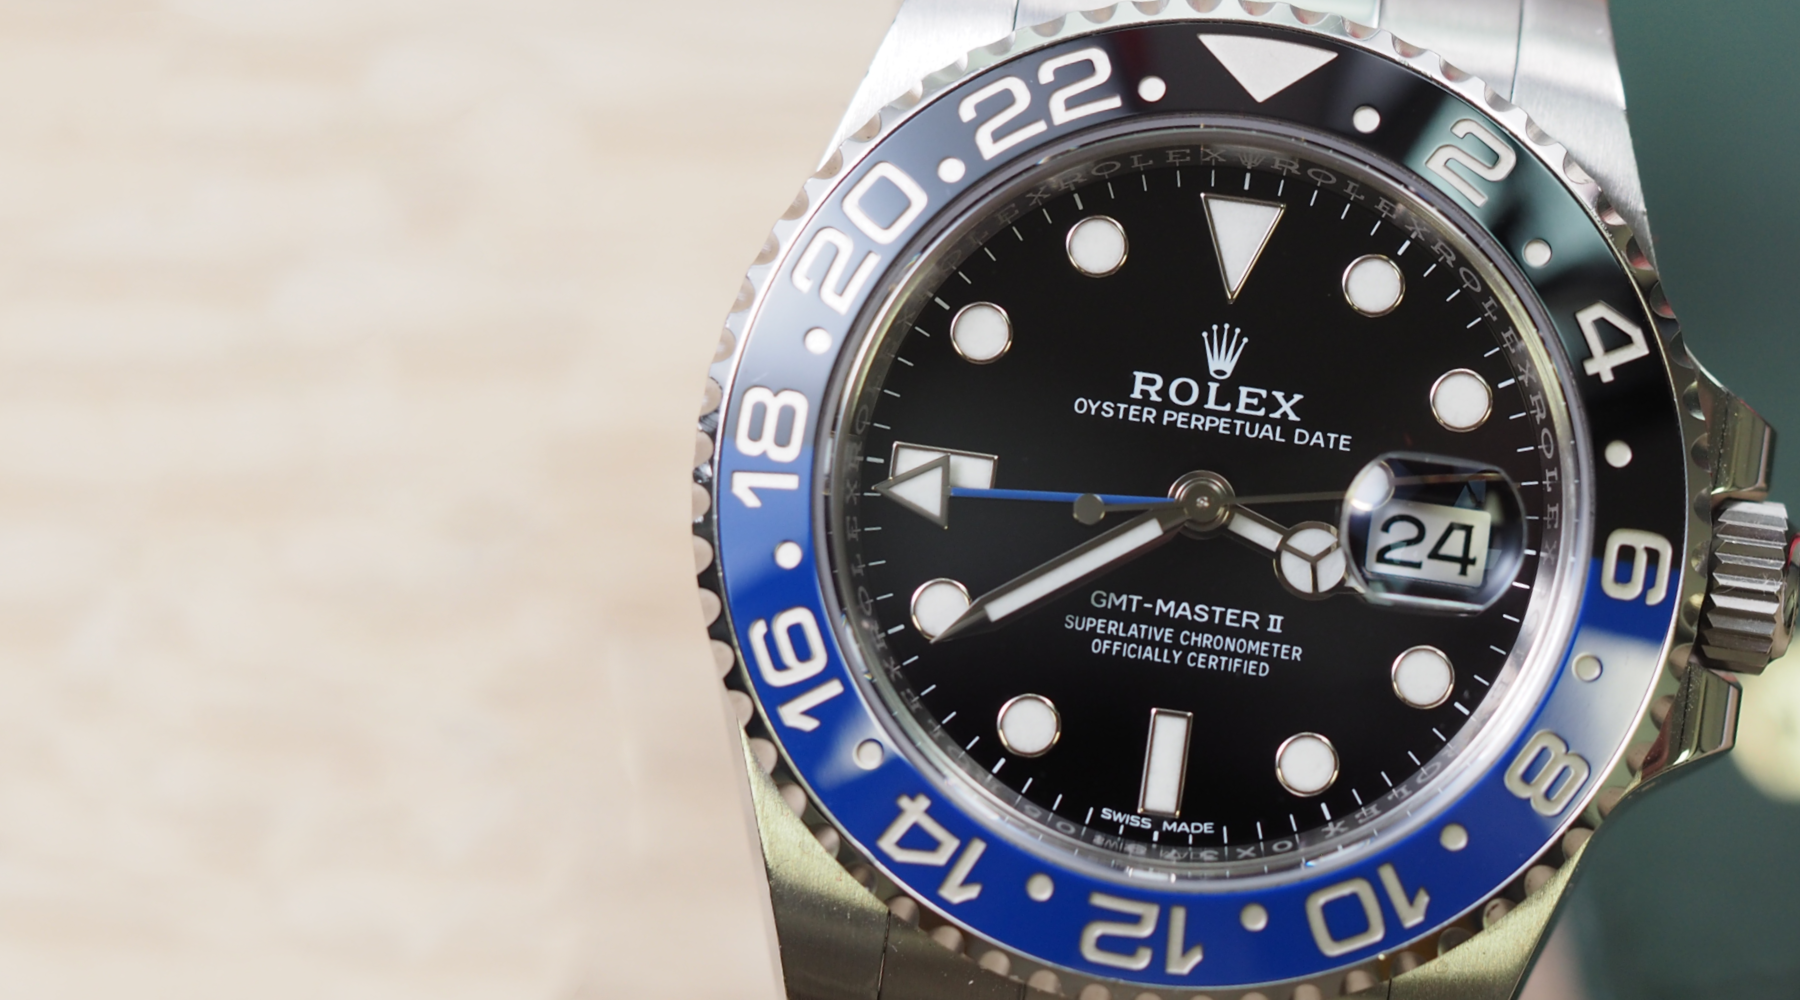 Pre Owned Rolex Watches | Swiss Watch Trader